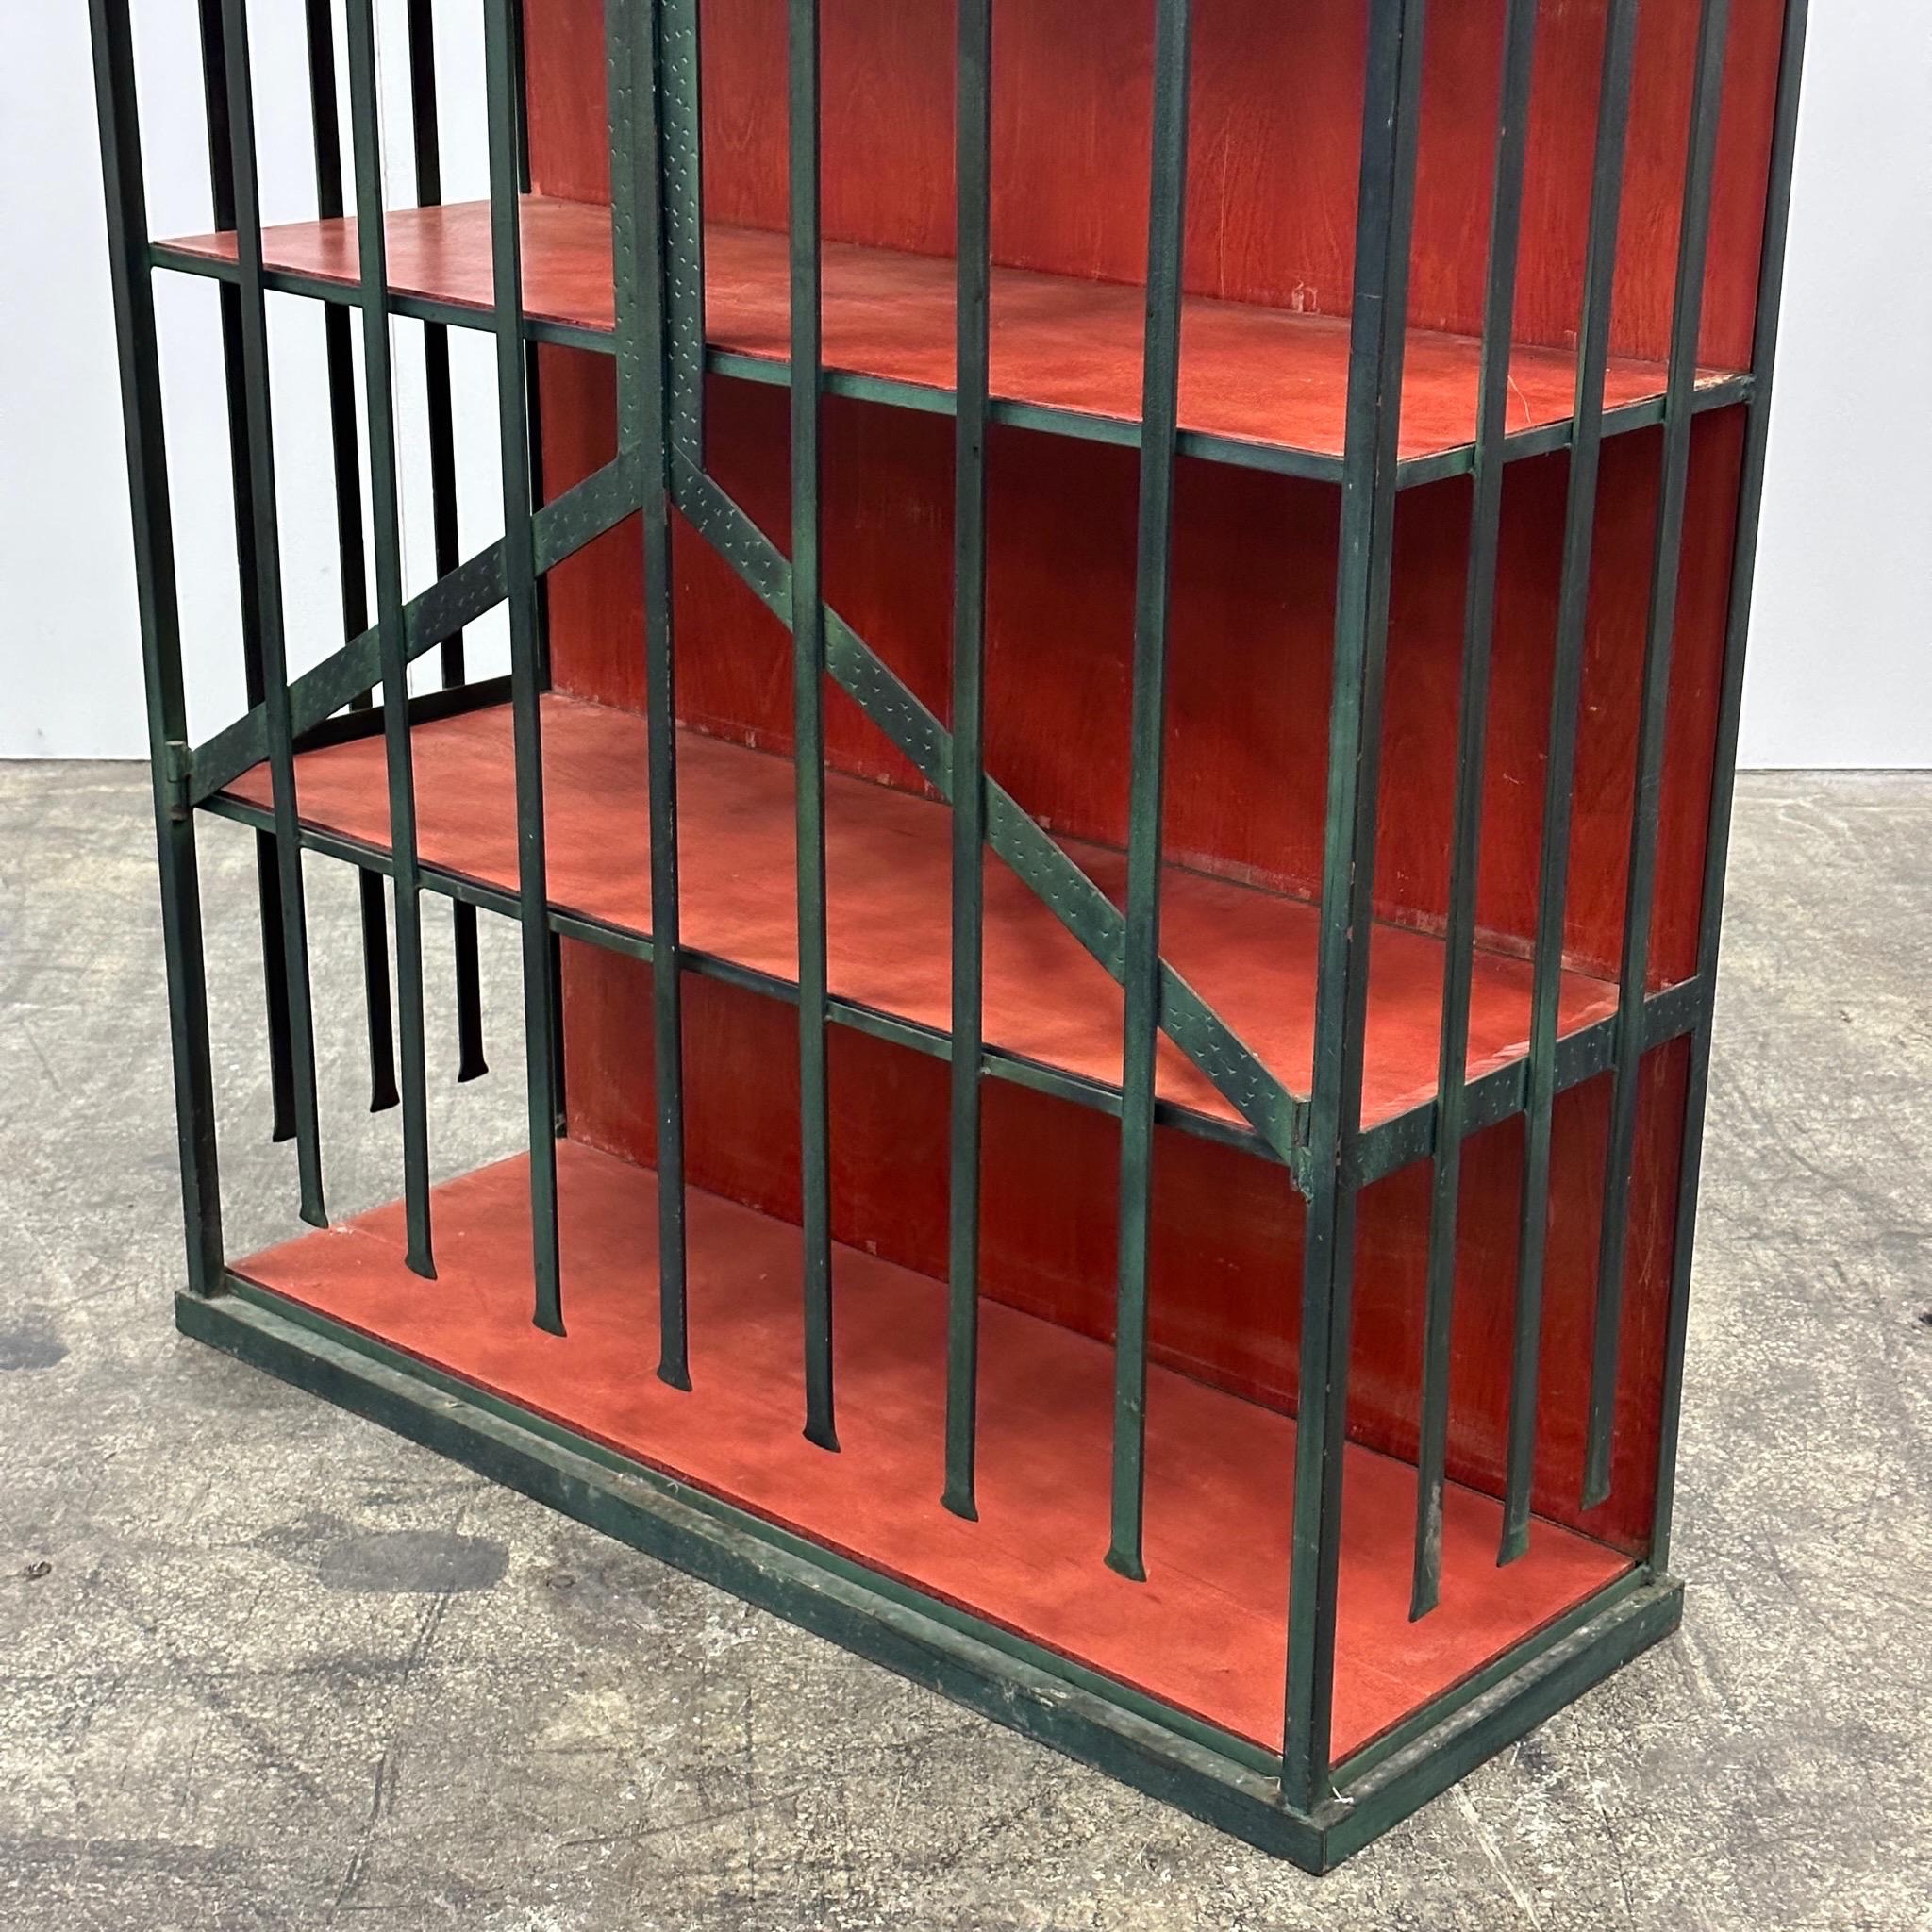 c. 1990s. Metal construction with plywood shelving and backing, can be customized to different color wood if desired. Latch in front to keep closed. 